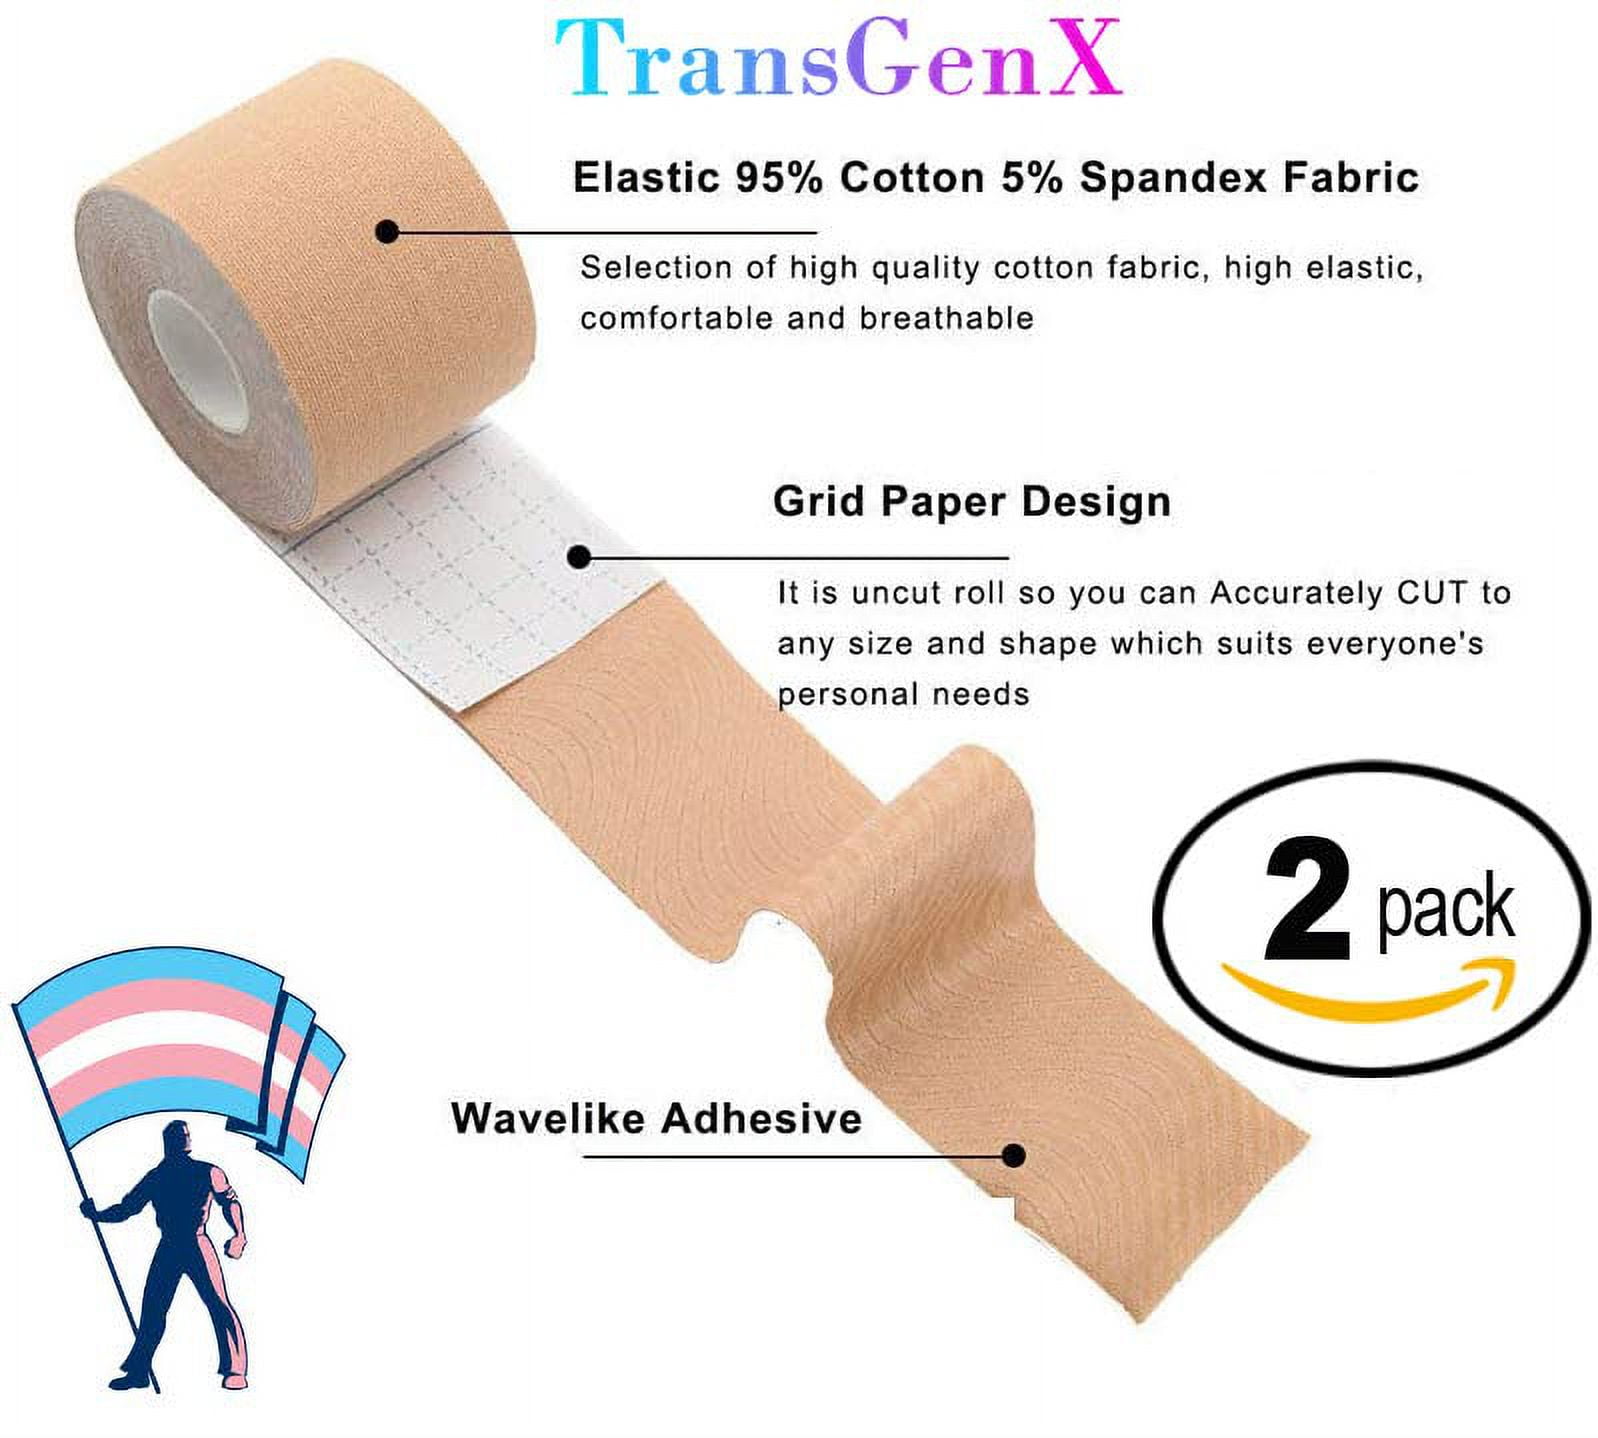  TransGenX Tape - Best Trans FTM Binder for Chest Binding While  Transitioning : Industrial & Scientific